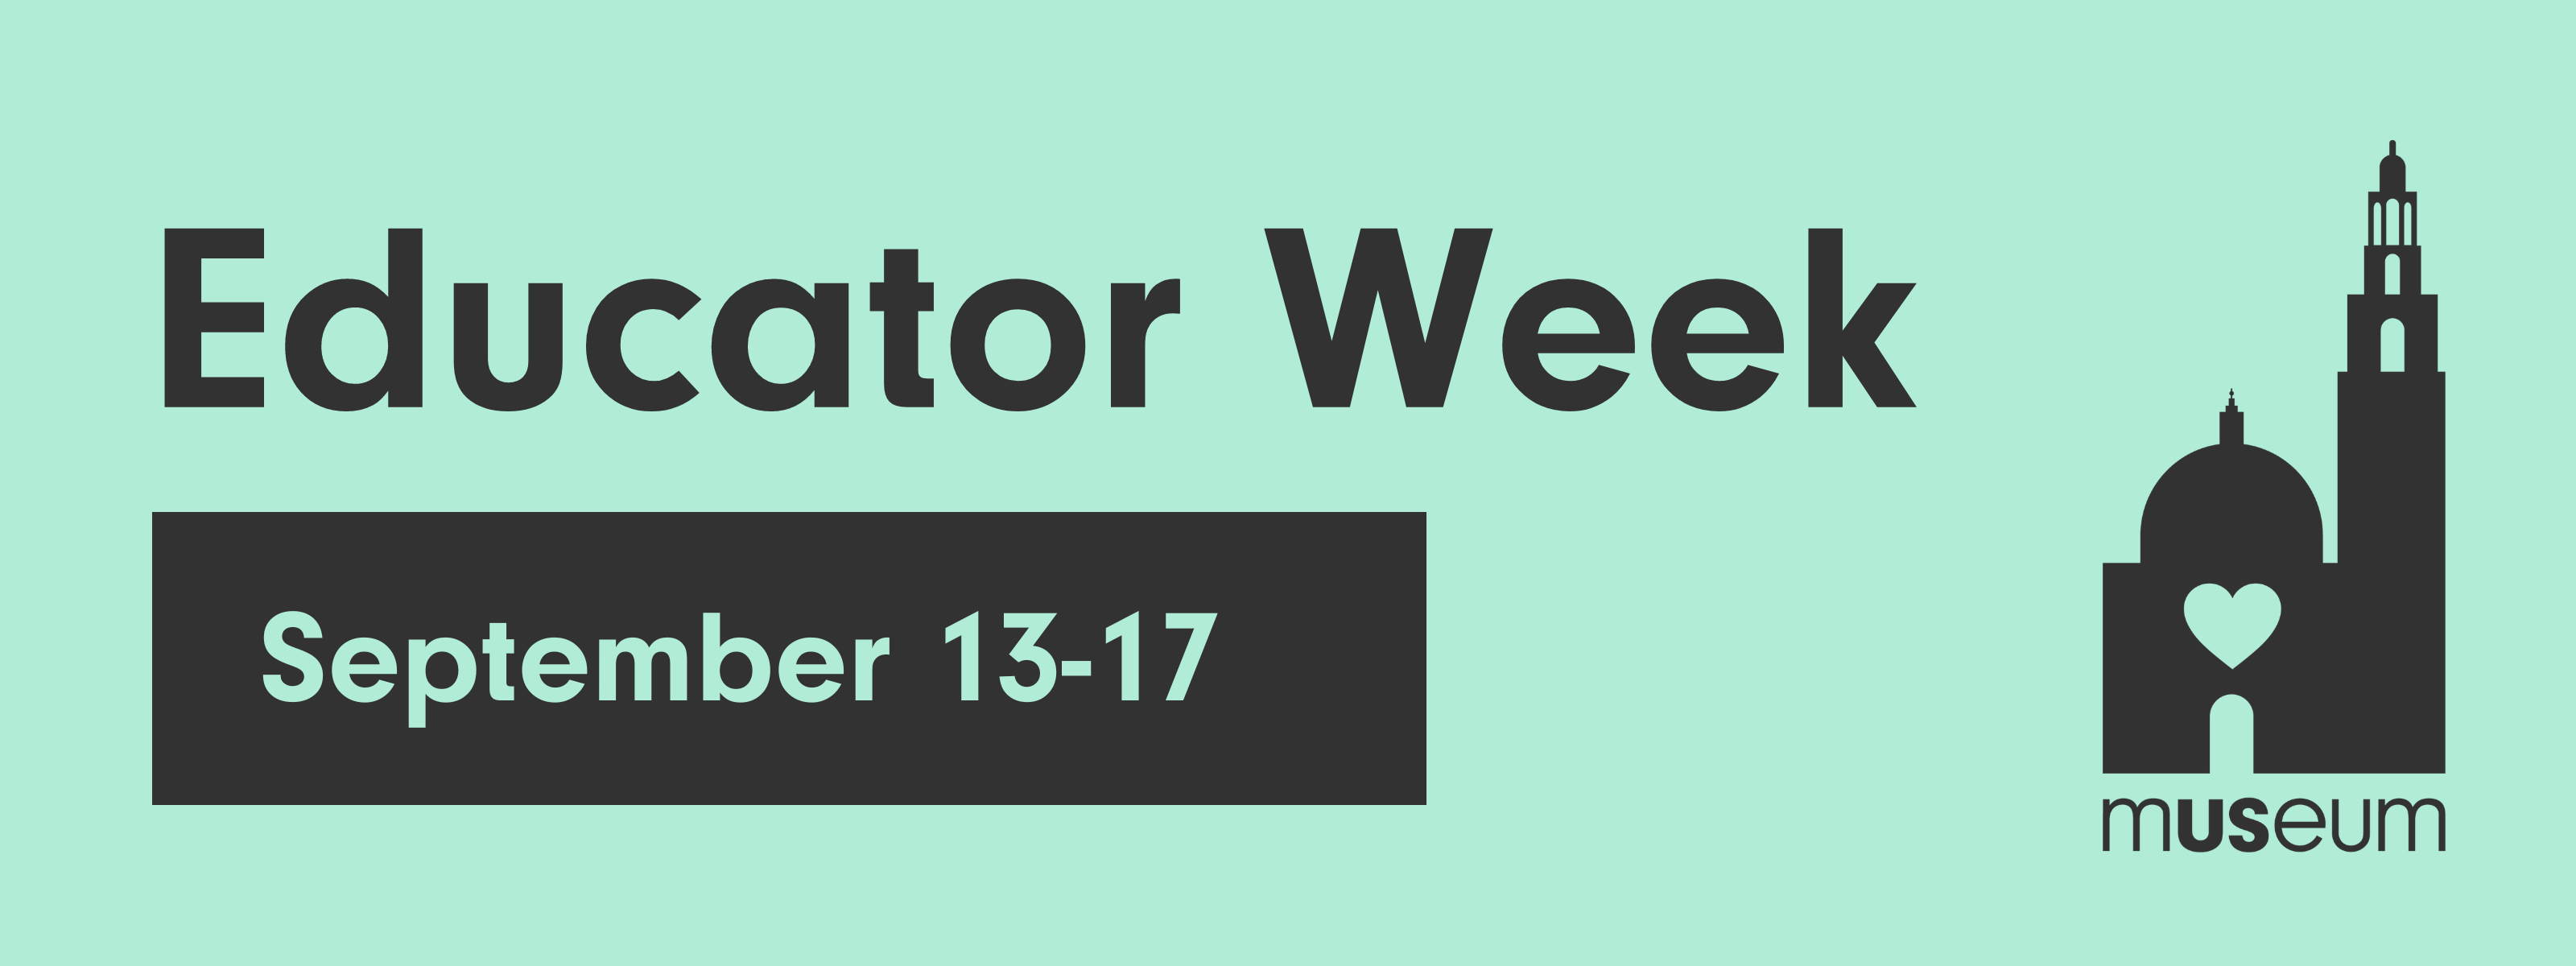 A light green, graphically designed image that says "Educator Week September 13-17"